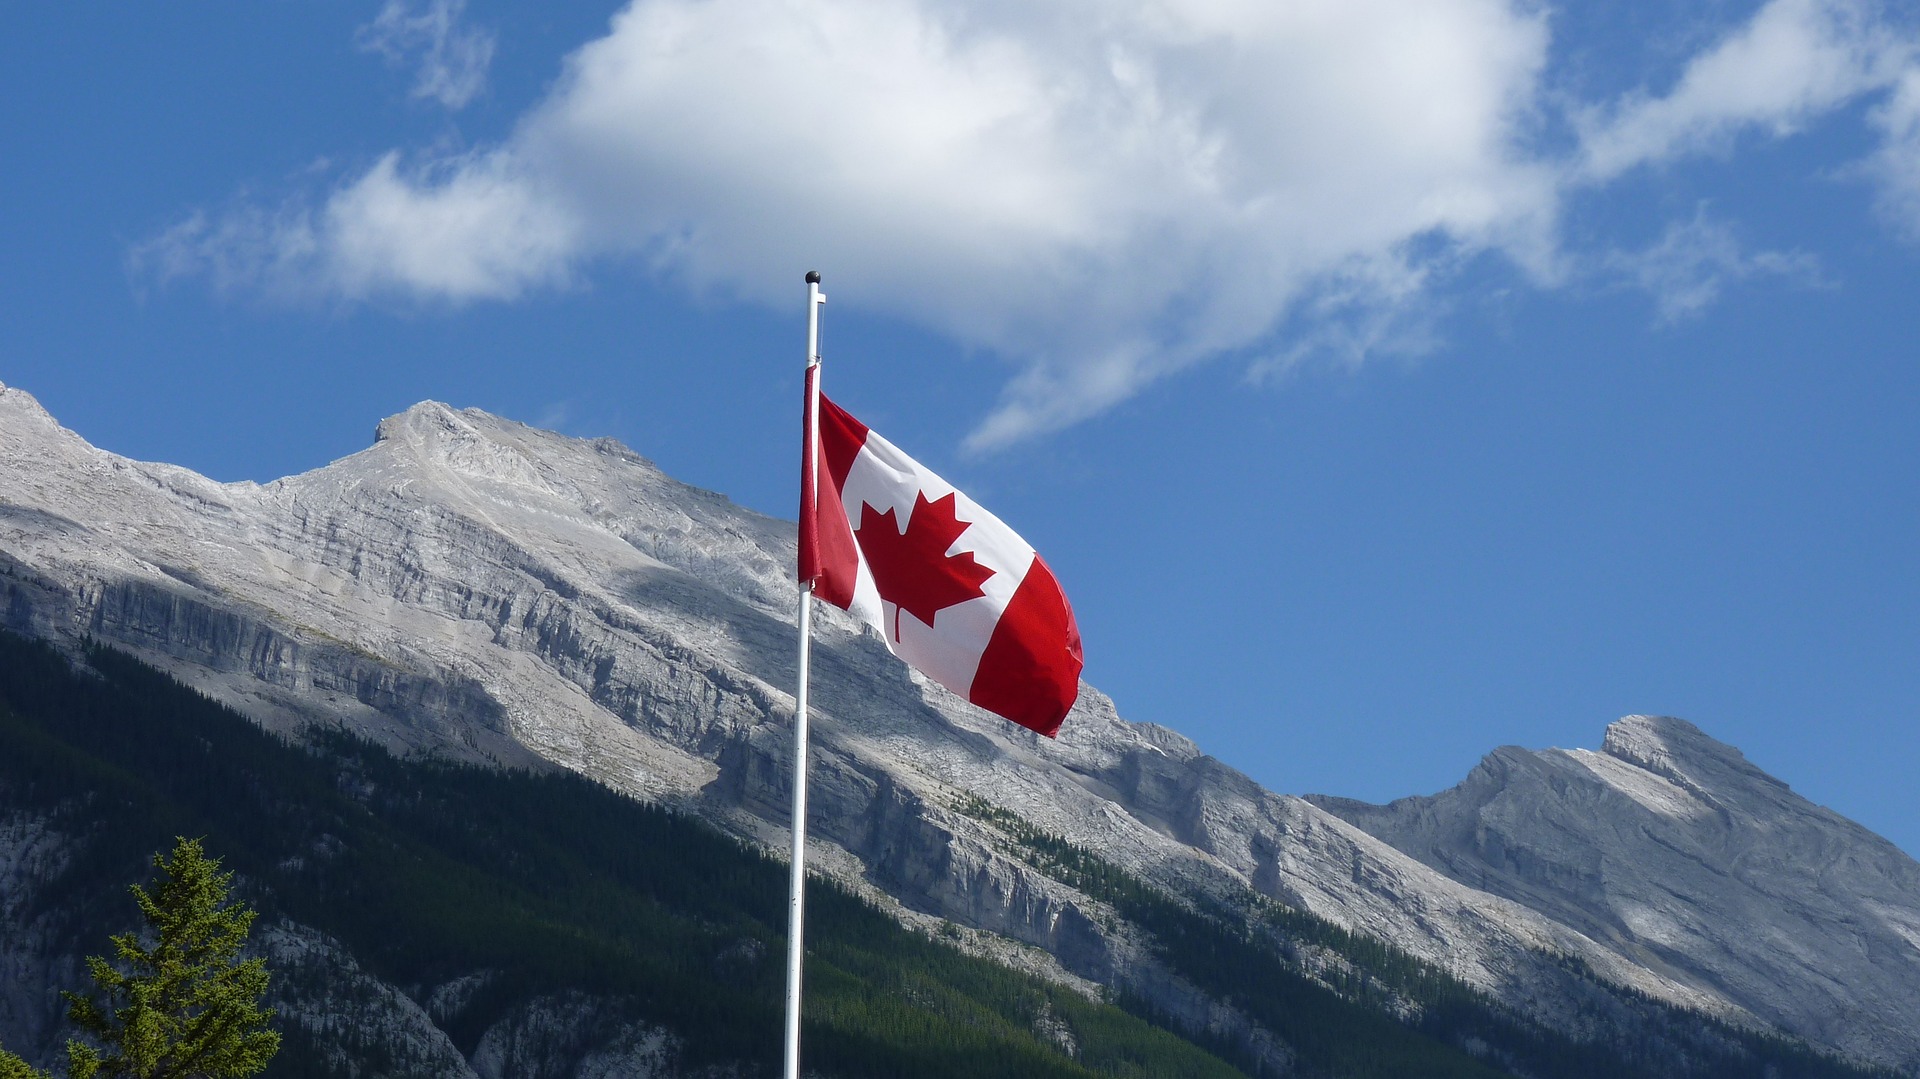 SEVEN FACTS ABOUT CANADA YOU MAY NOT KNOW